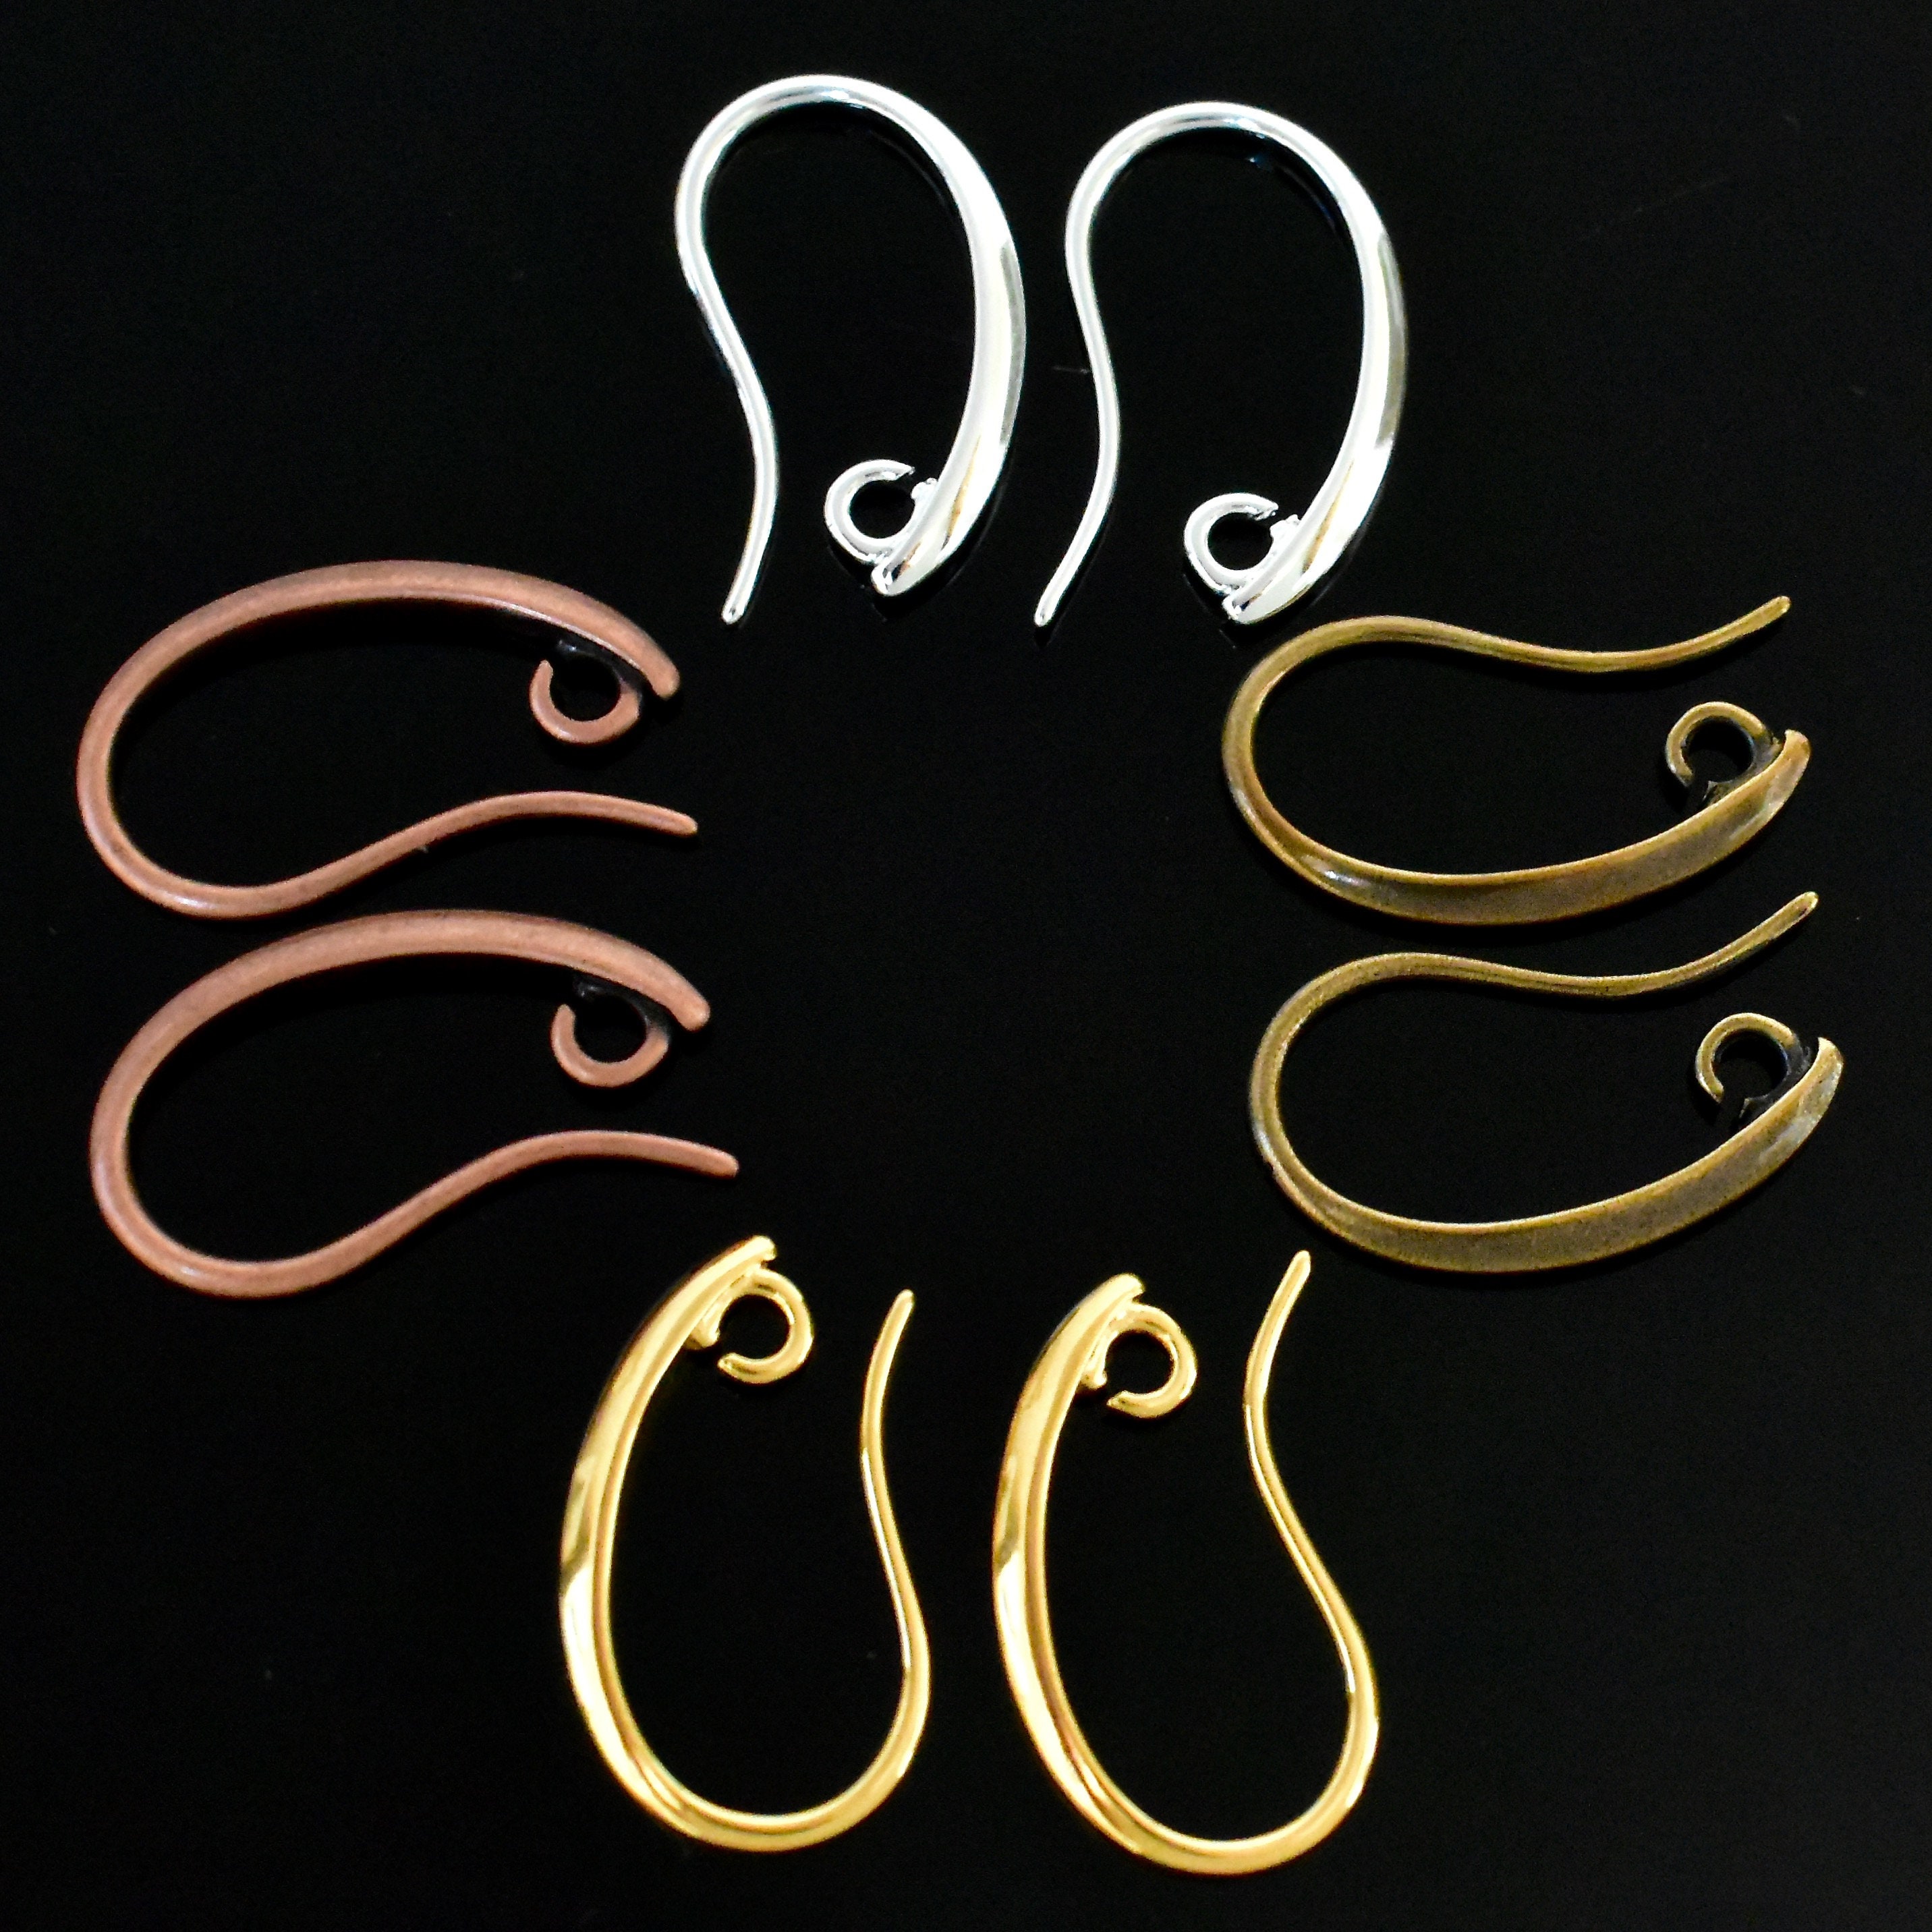 10 Pair Silicone Earring Backs Replacements Soft Clear Earring Backs, Heart  Shaped Locking Earring Backs Stopper for Earring Jewelry Finding 